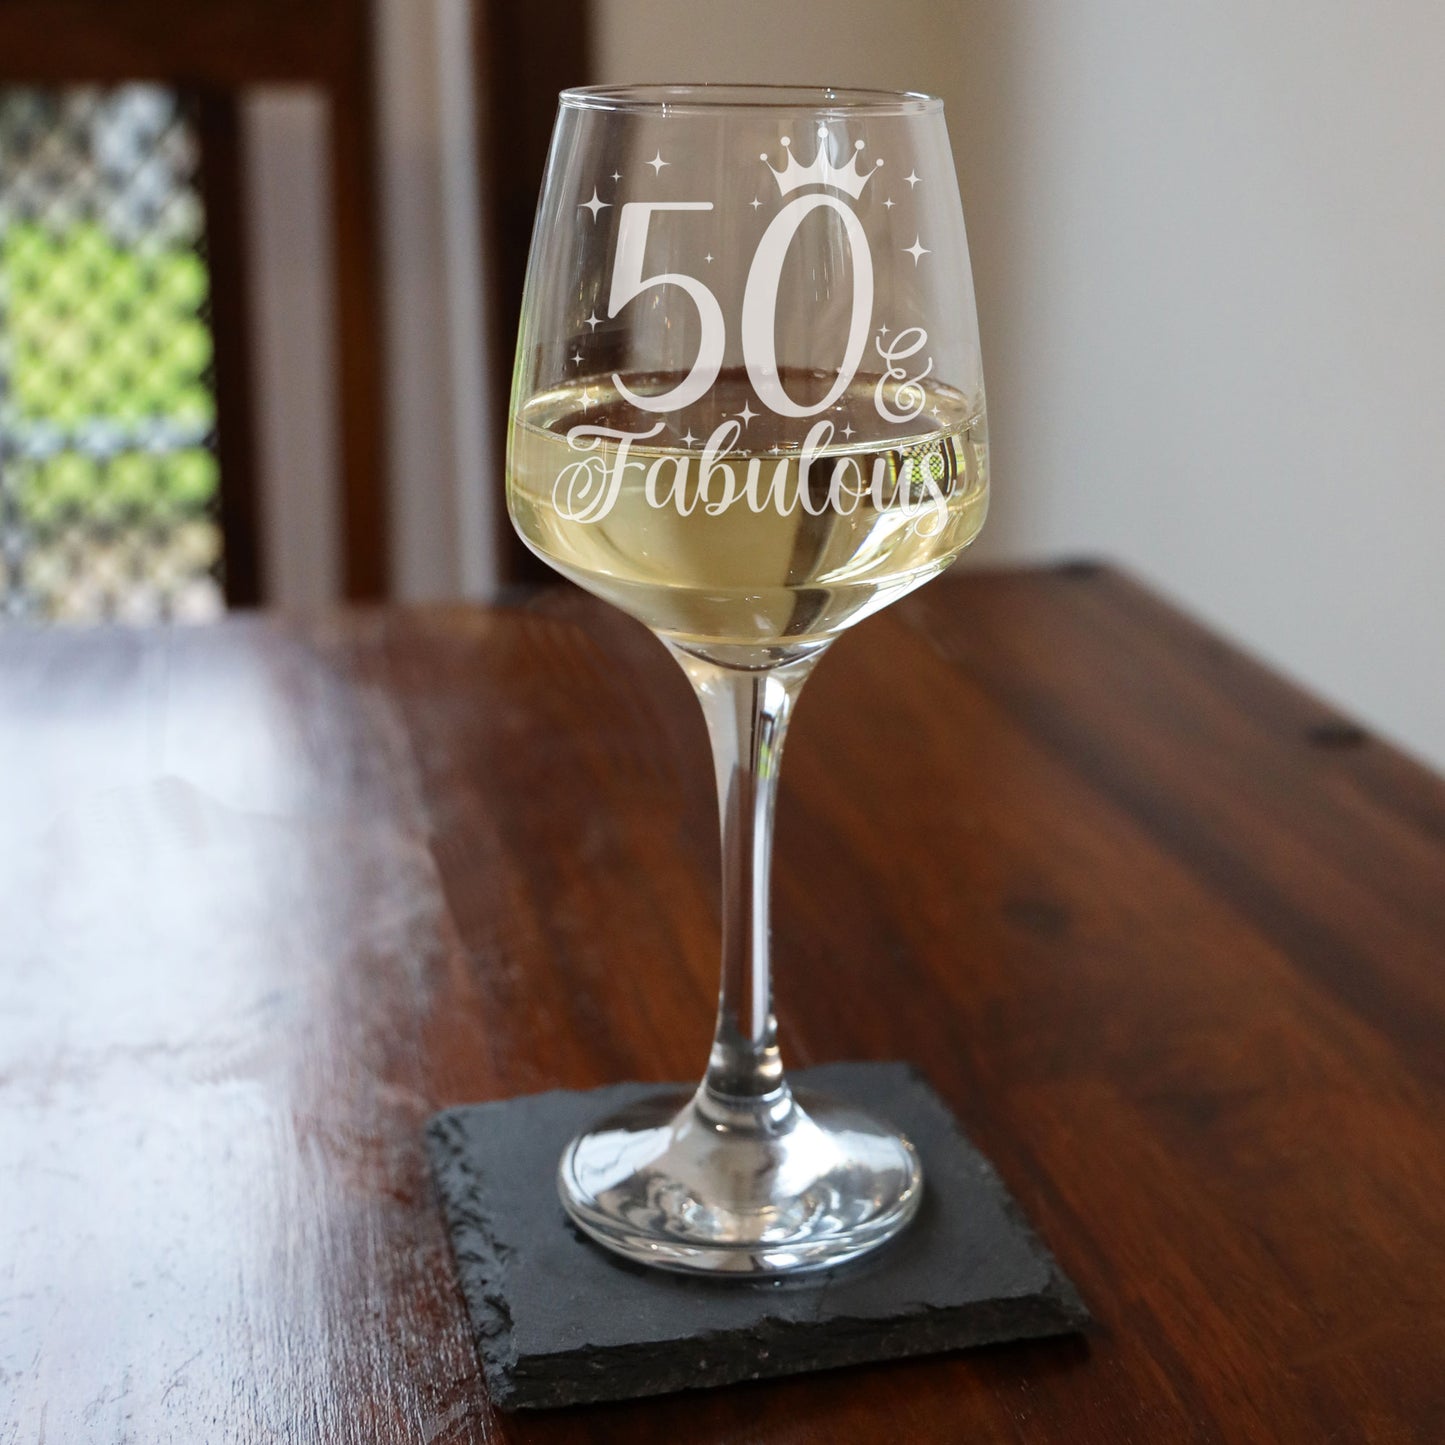 50 & Fabulous 50th Birthday Gift Engraved Wine Glass and/or Coaster Set  - Always Looking Good - Wine Glass Only  